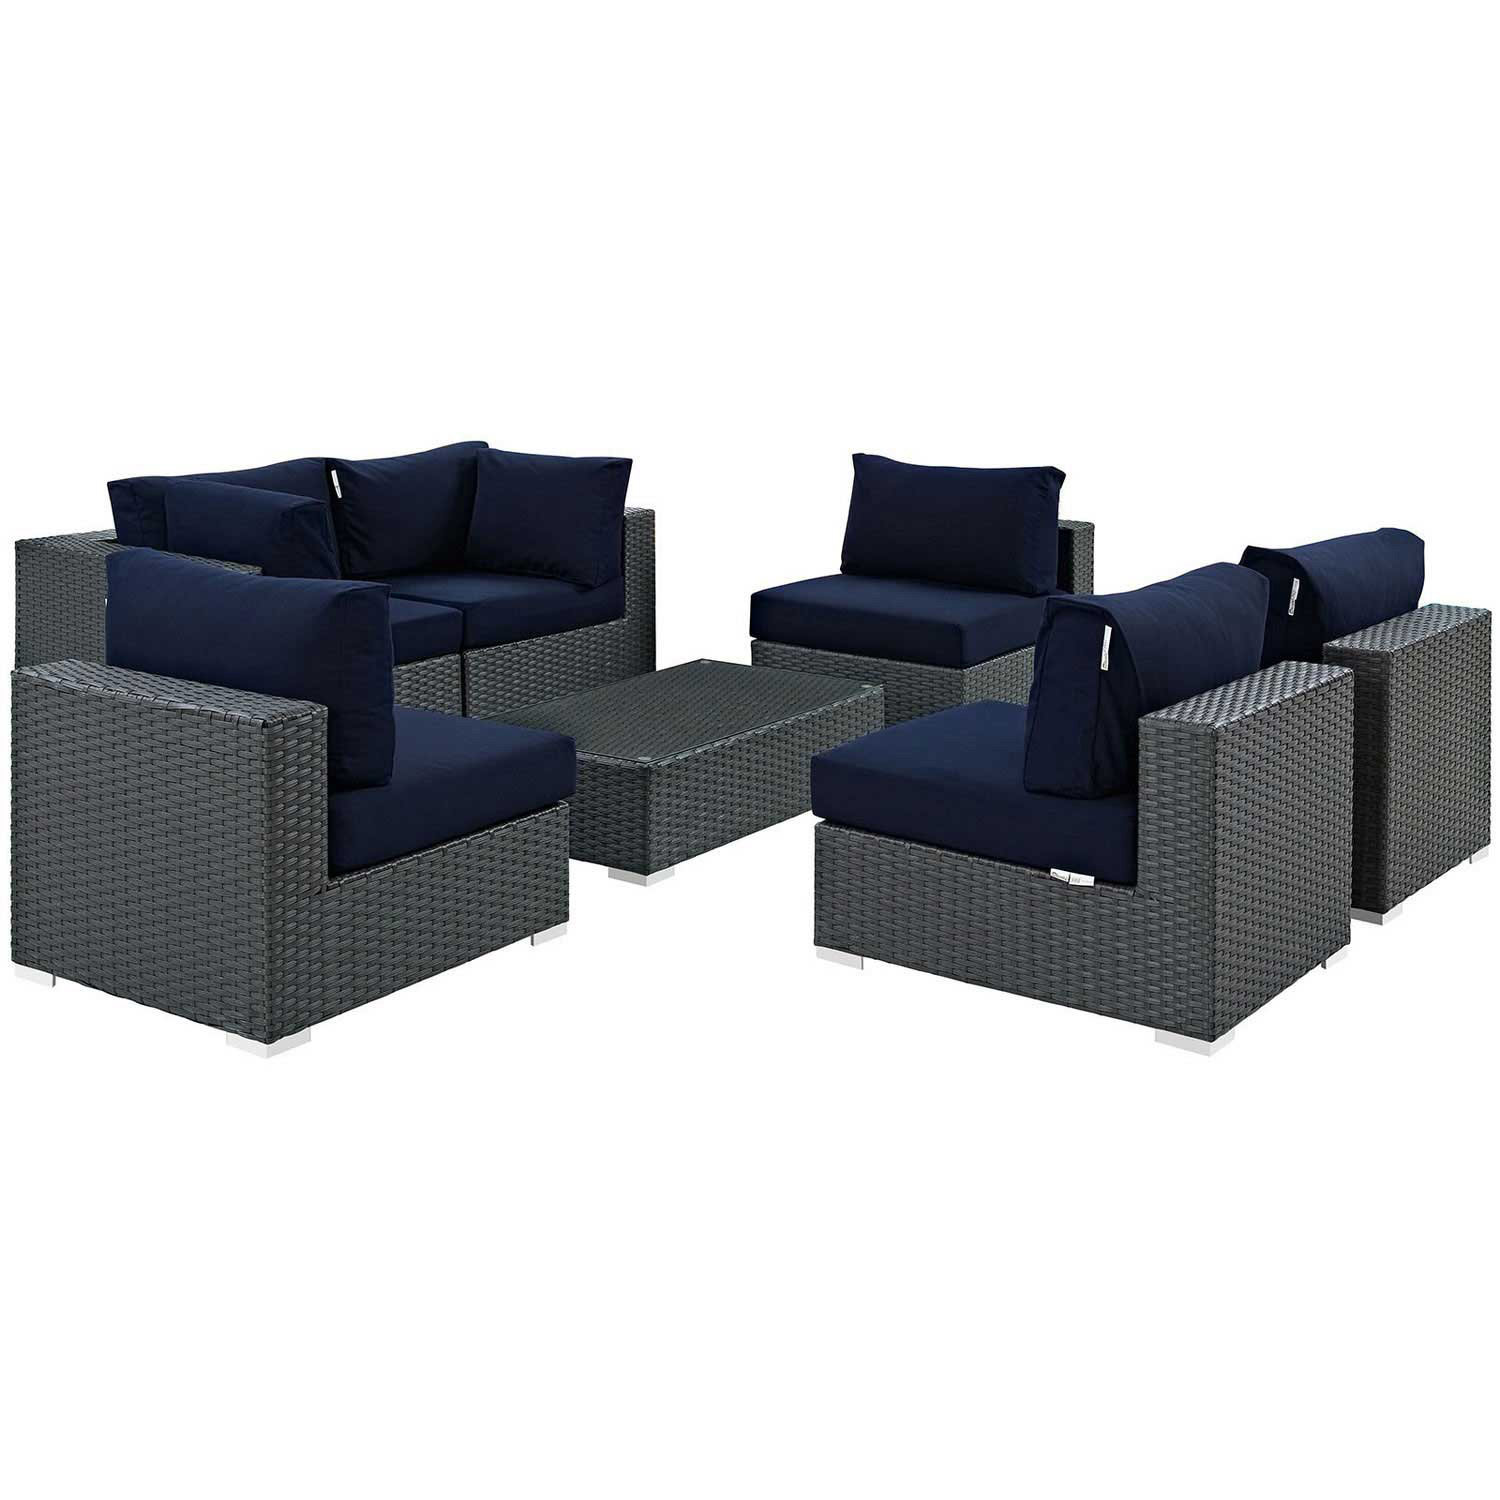 Modway Sojourn 7 Piece Outdoor Patio Sunbrella Sectional Set - Canvas Navy